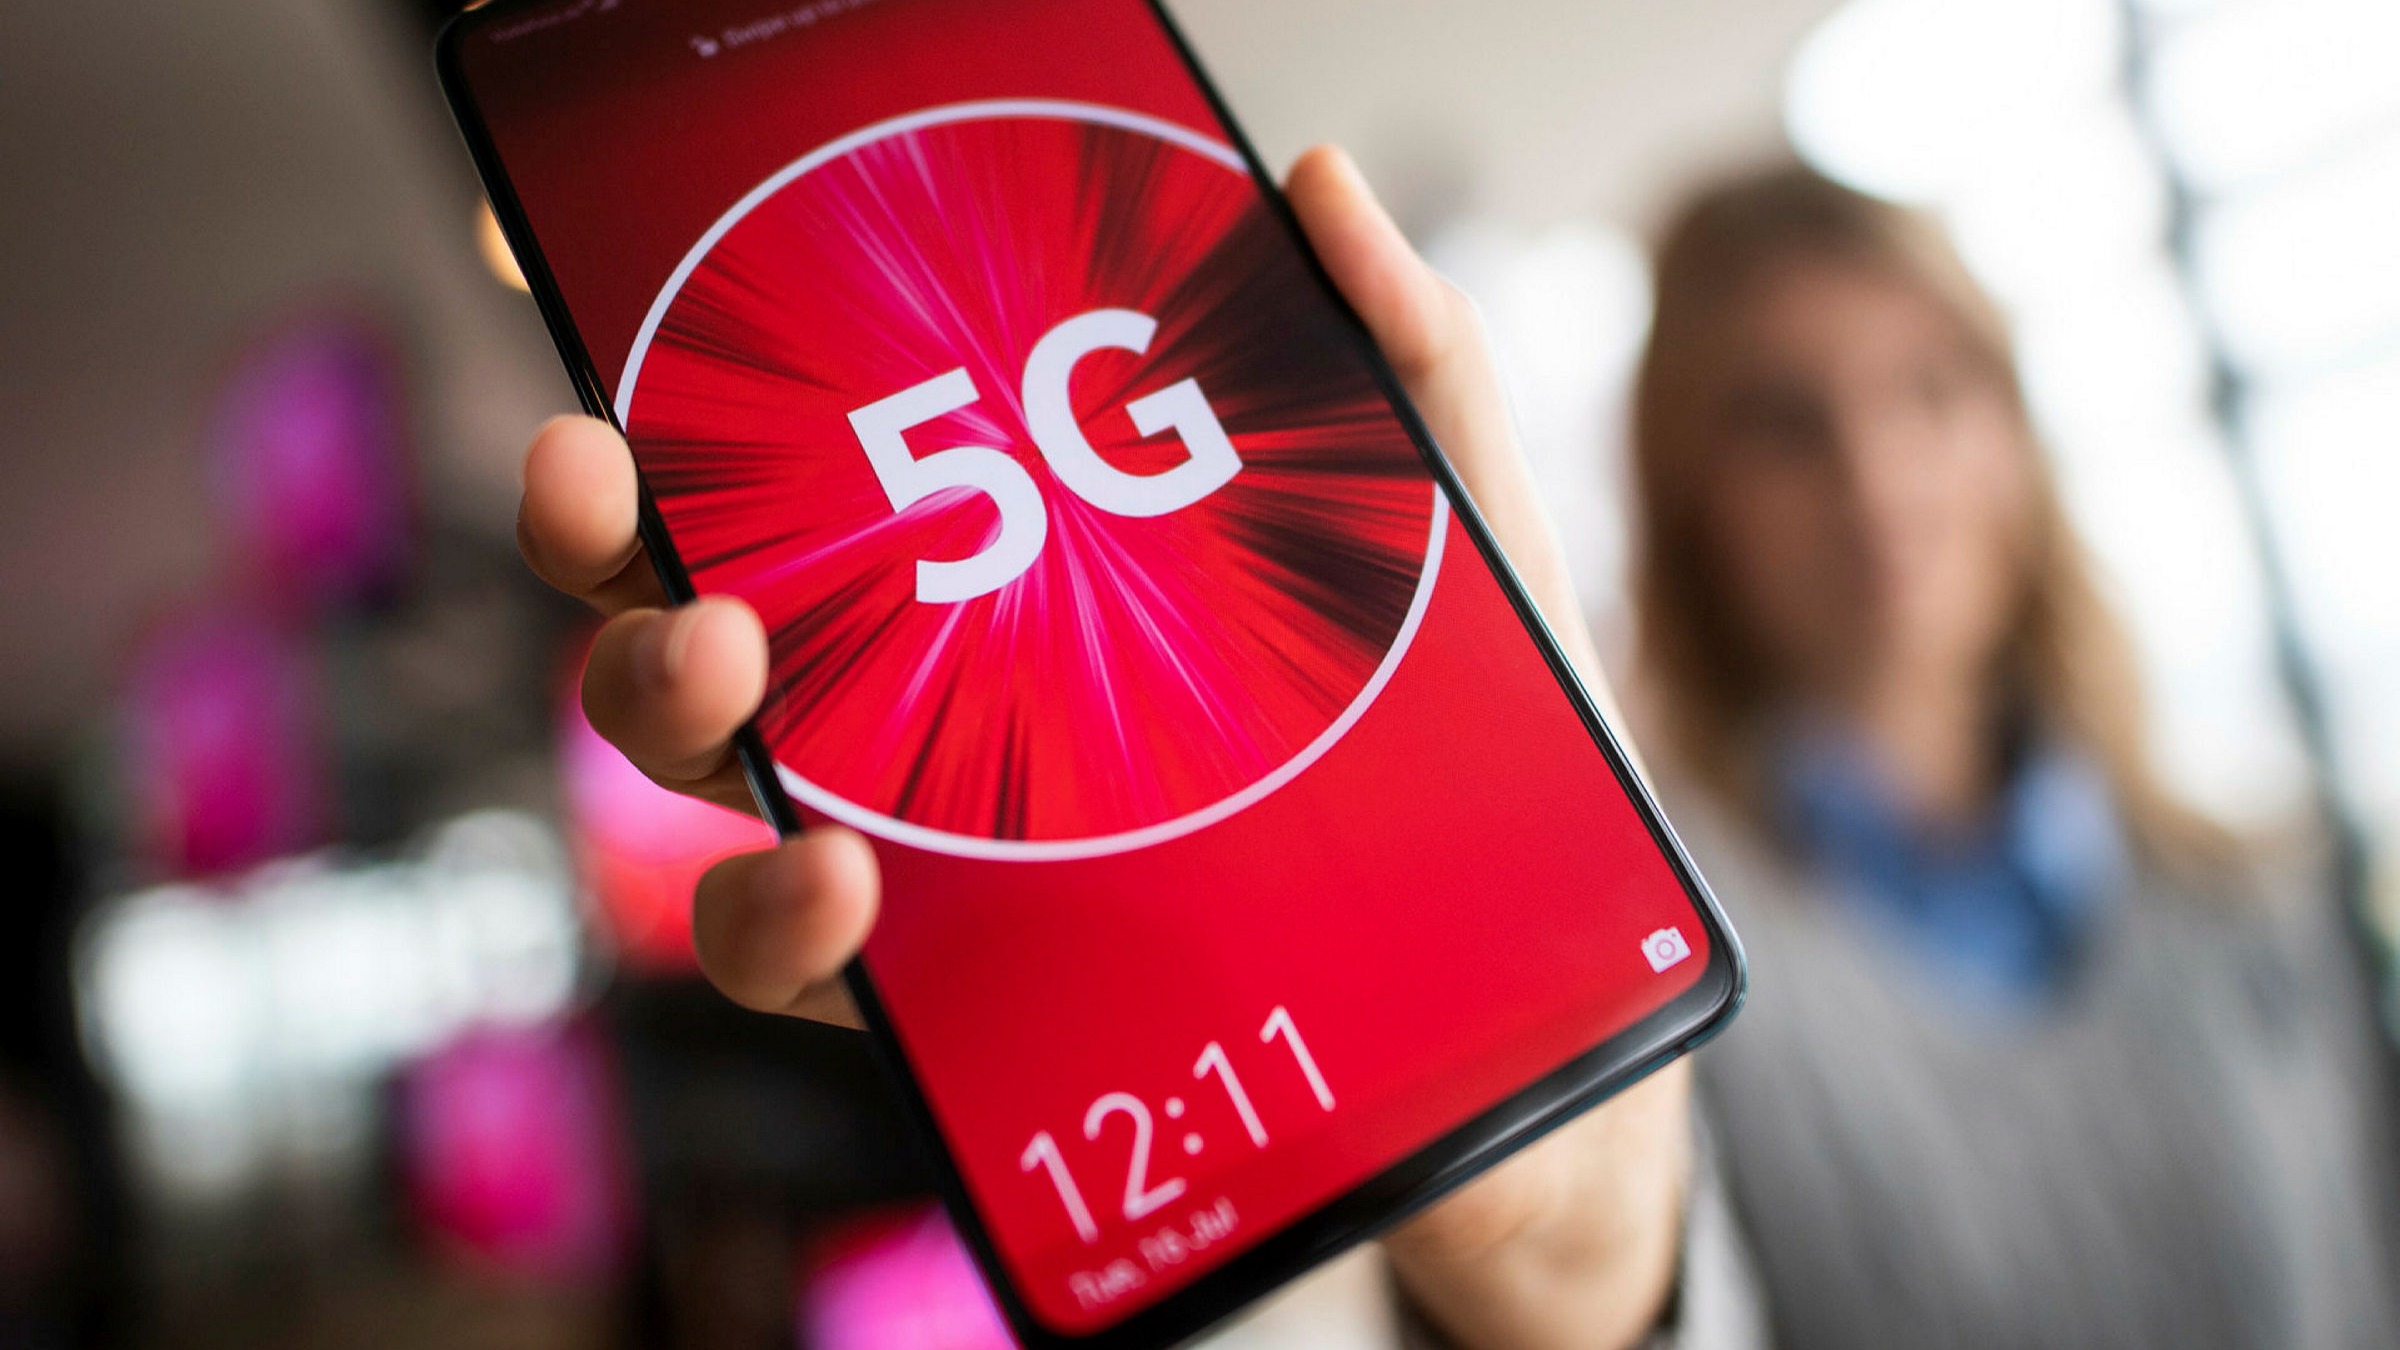 Vodafone wants 5G auction to be scrapped after Huawei move | Financial Times